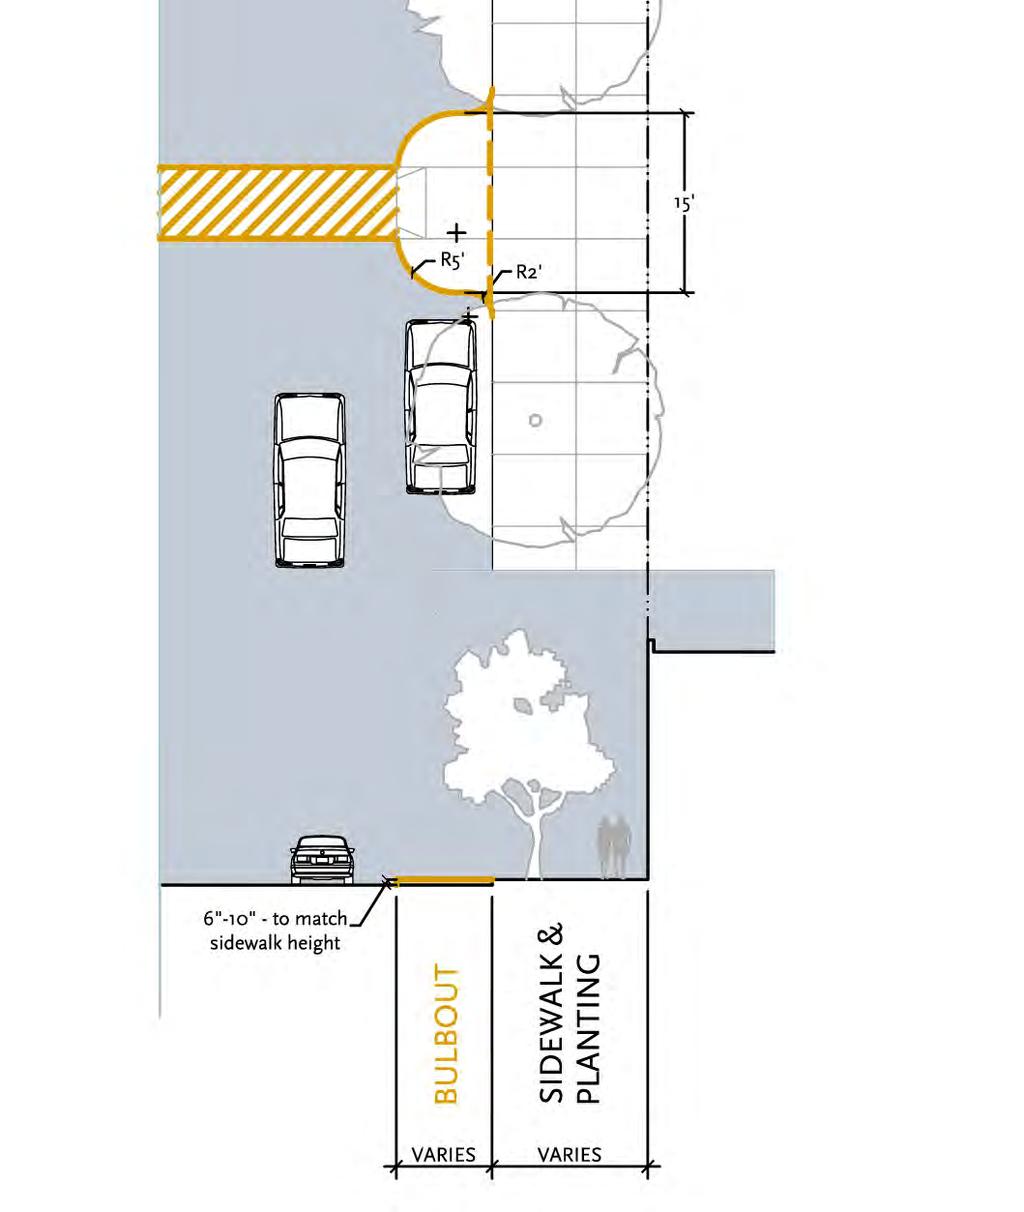 A - A minimum of 3 when garages face each other across alley B - 4' shoulders to be constructed with structured capacity either with suface pavers or gravel subgrade Plan / Section Diagram Typical